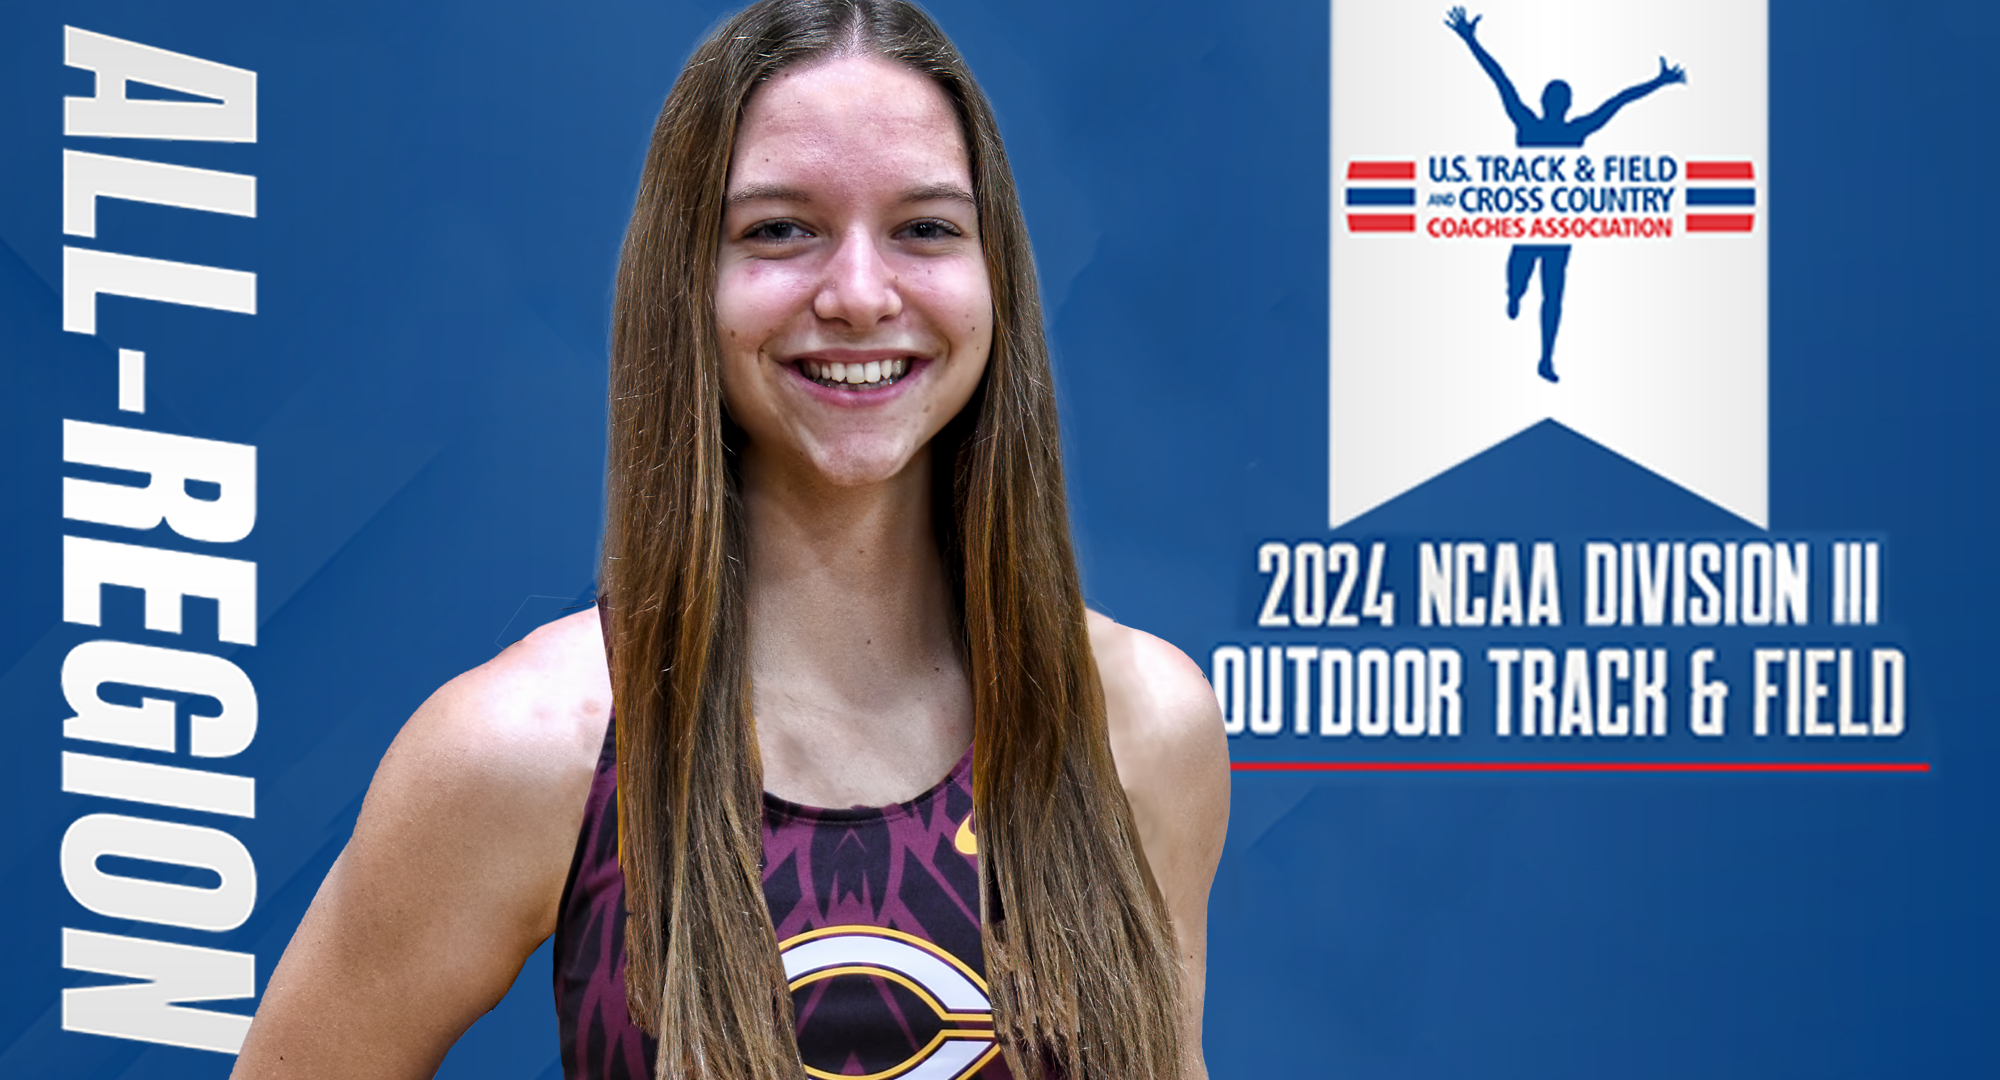 Genevieve Gruba earned USTFCCCA North All-Region honors for finishing in the Top 5 of the teams in the North Region in the javelin this season.